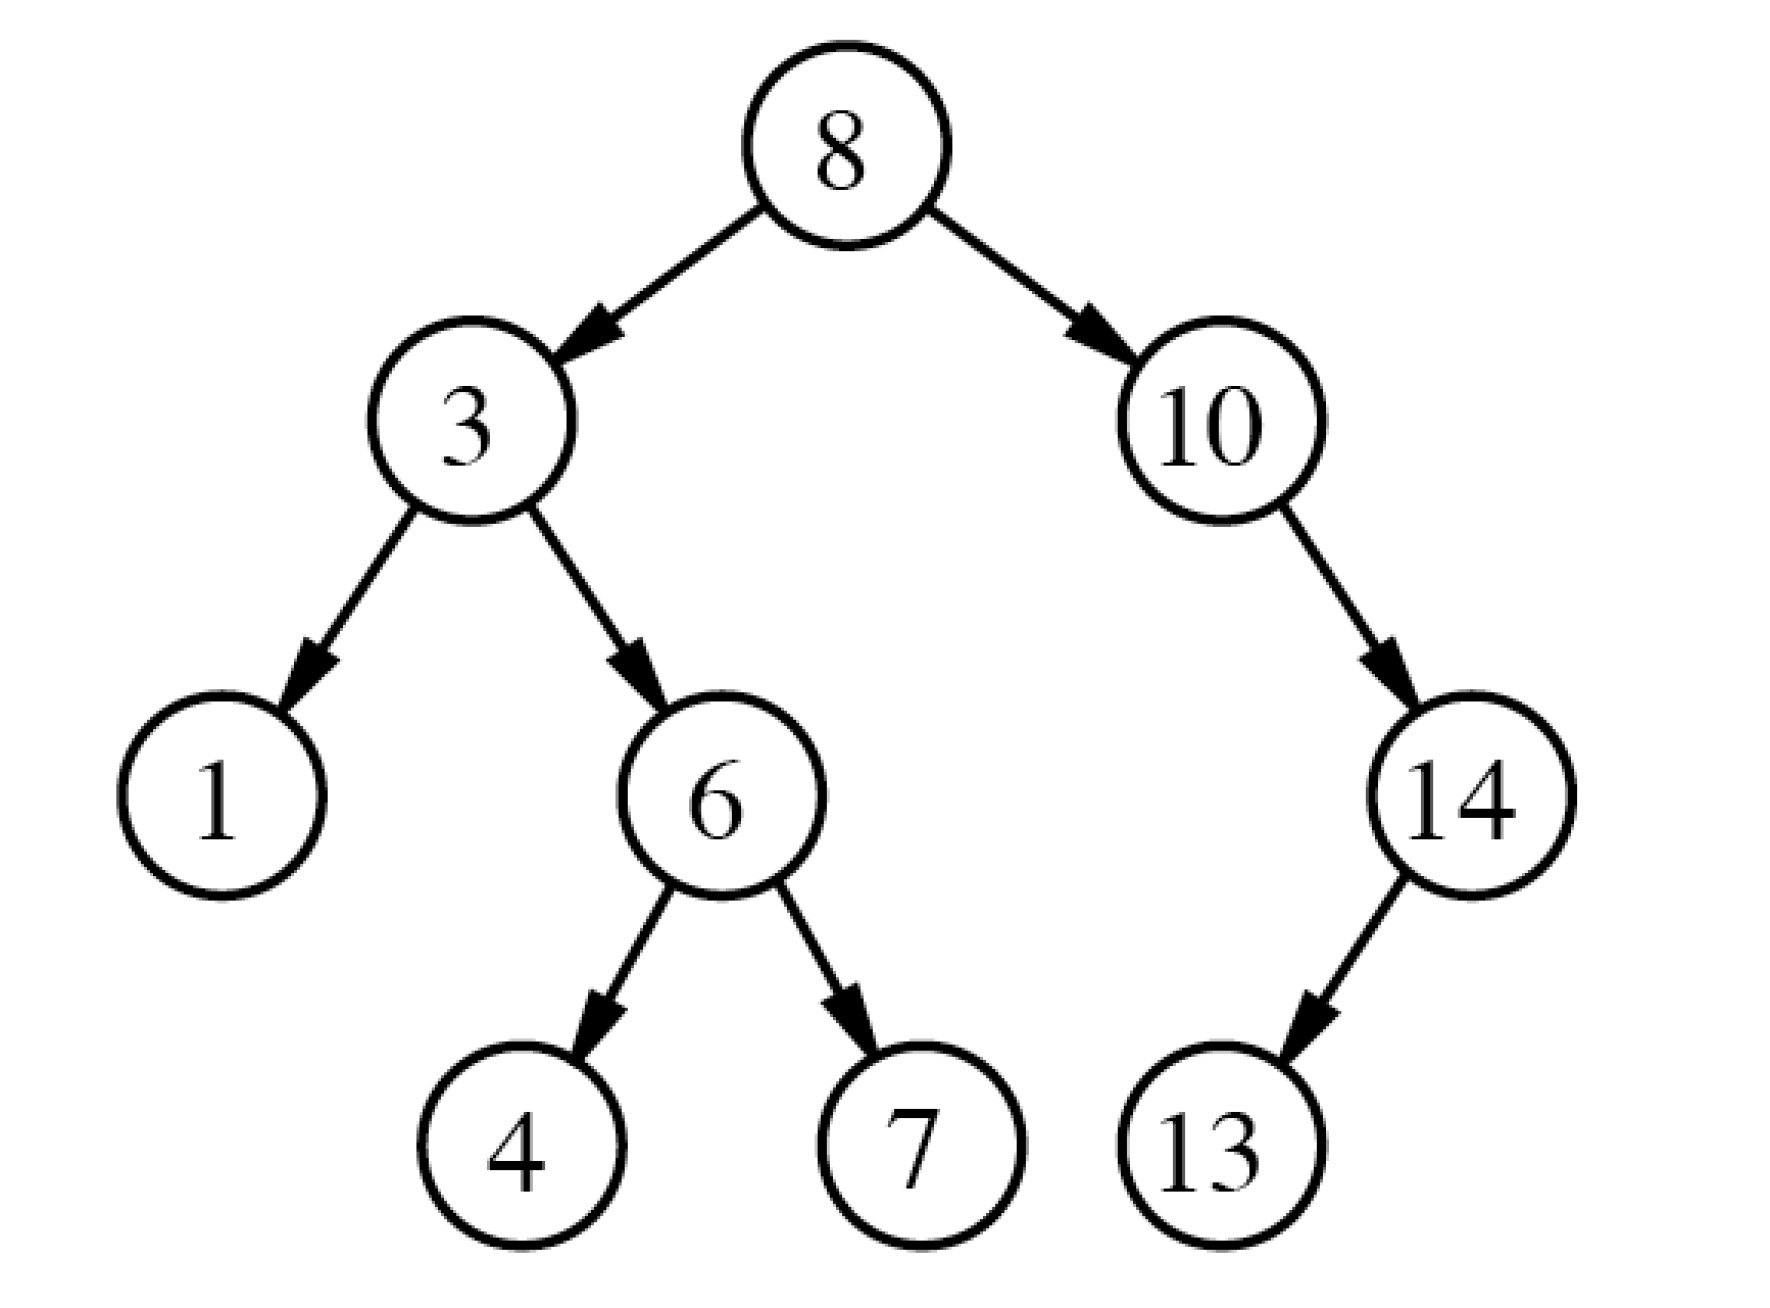 example of binary
search tree